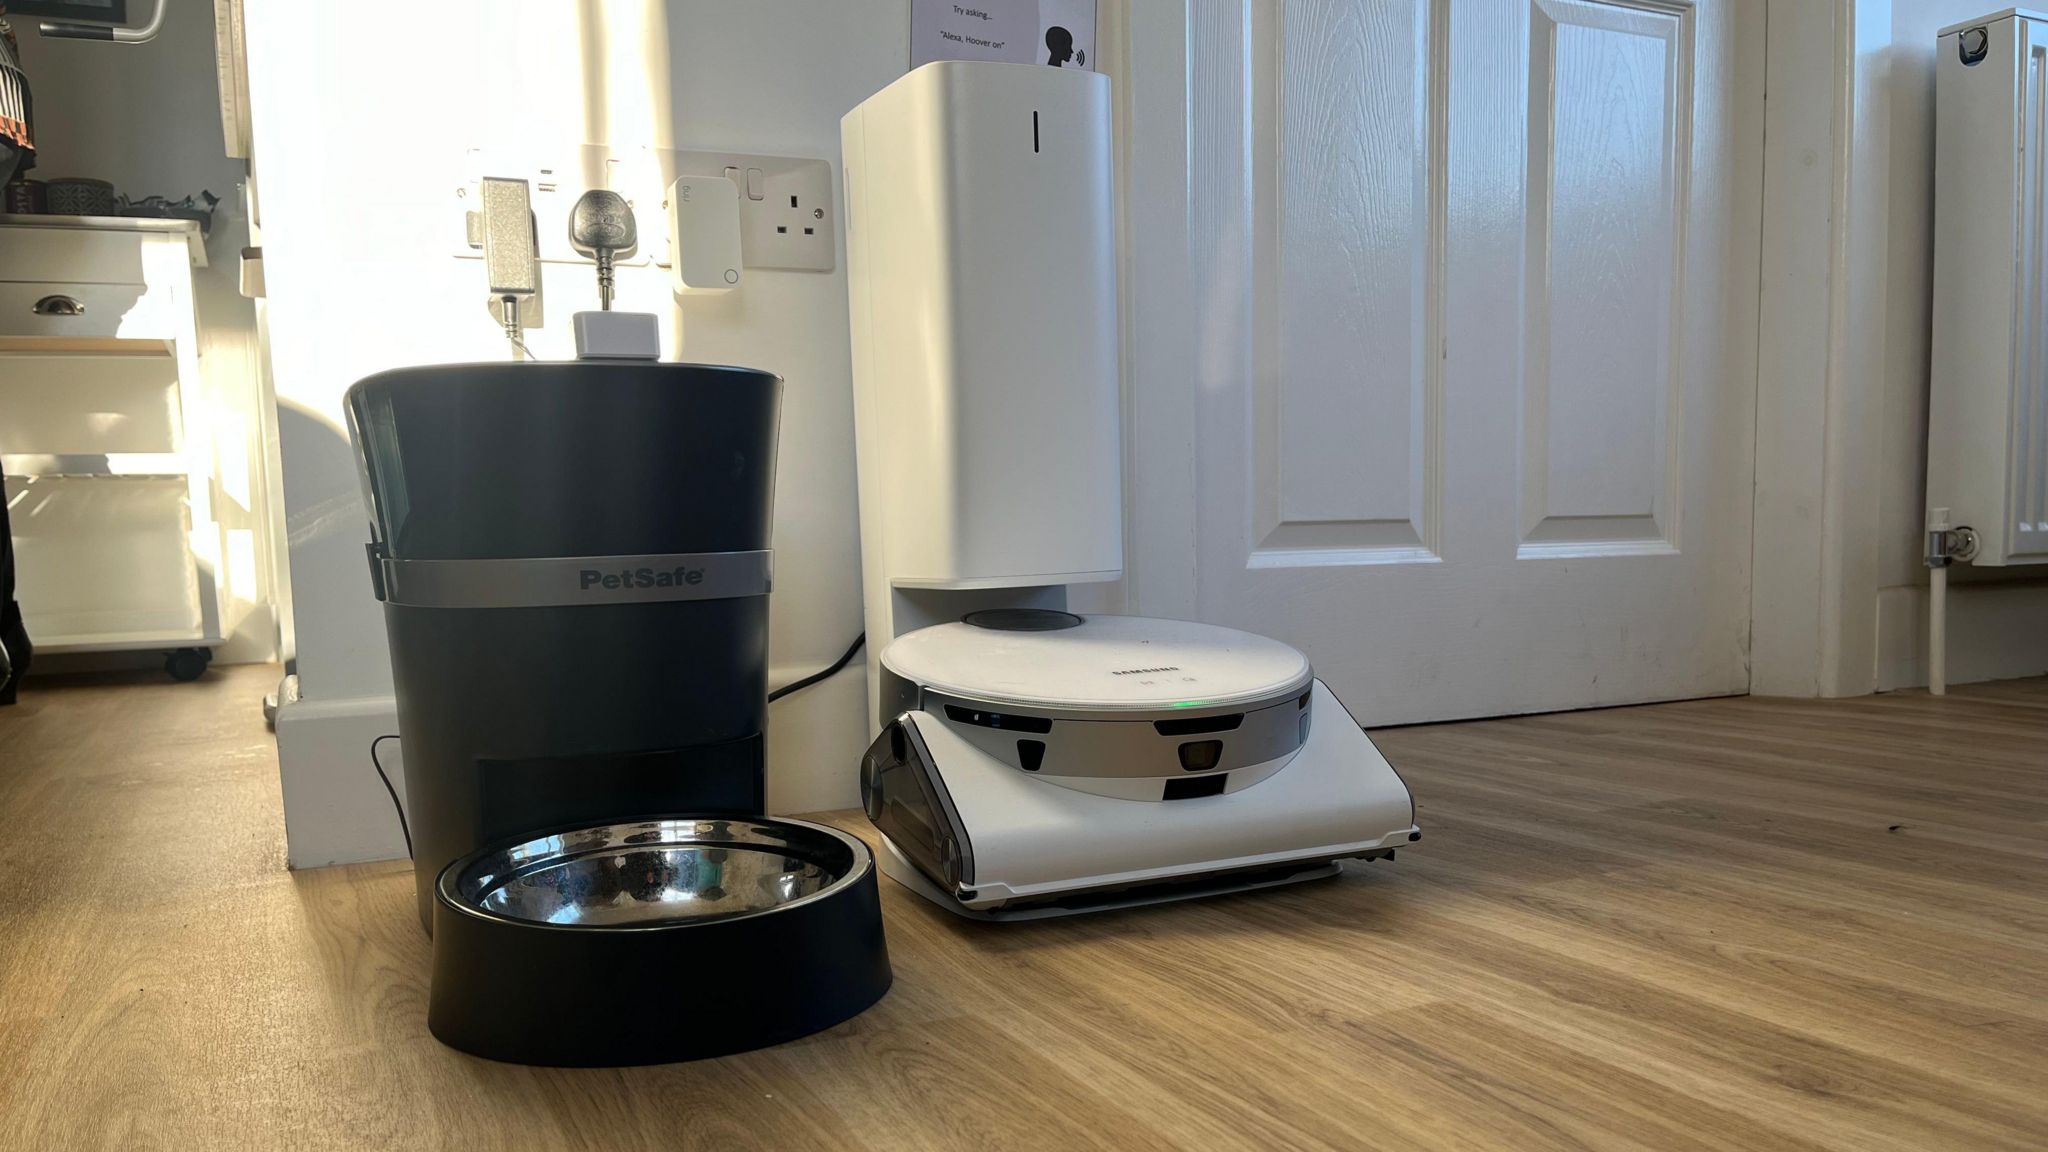 An AI vacuum cleaner and refillable dog bowl